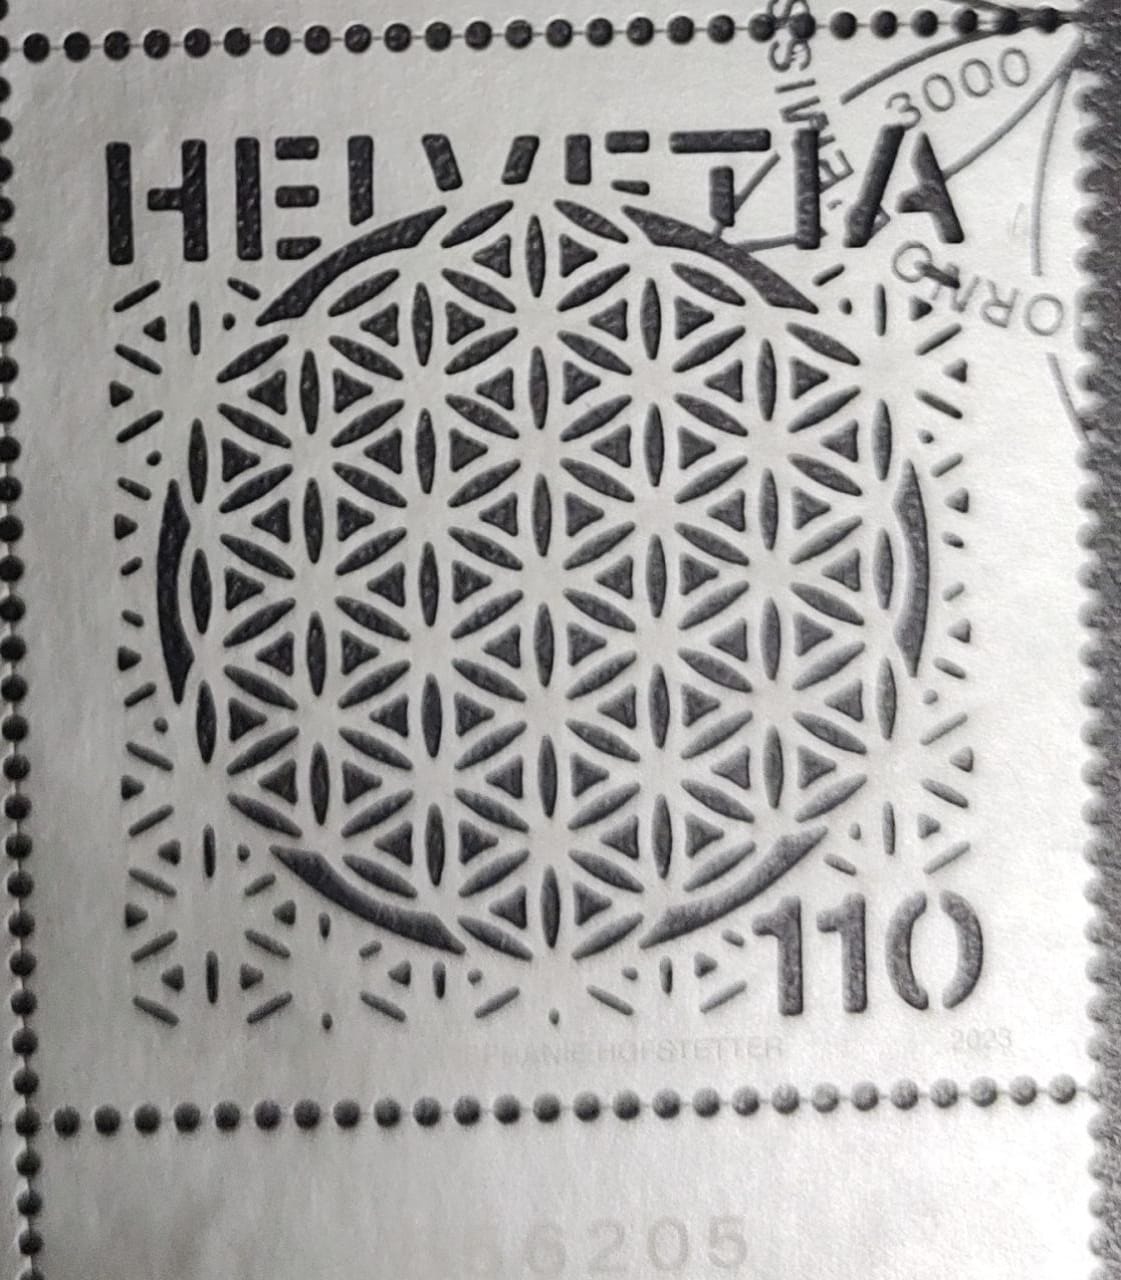 Swiss laser cut first day cancelled stamp on Flower of life.